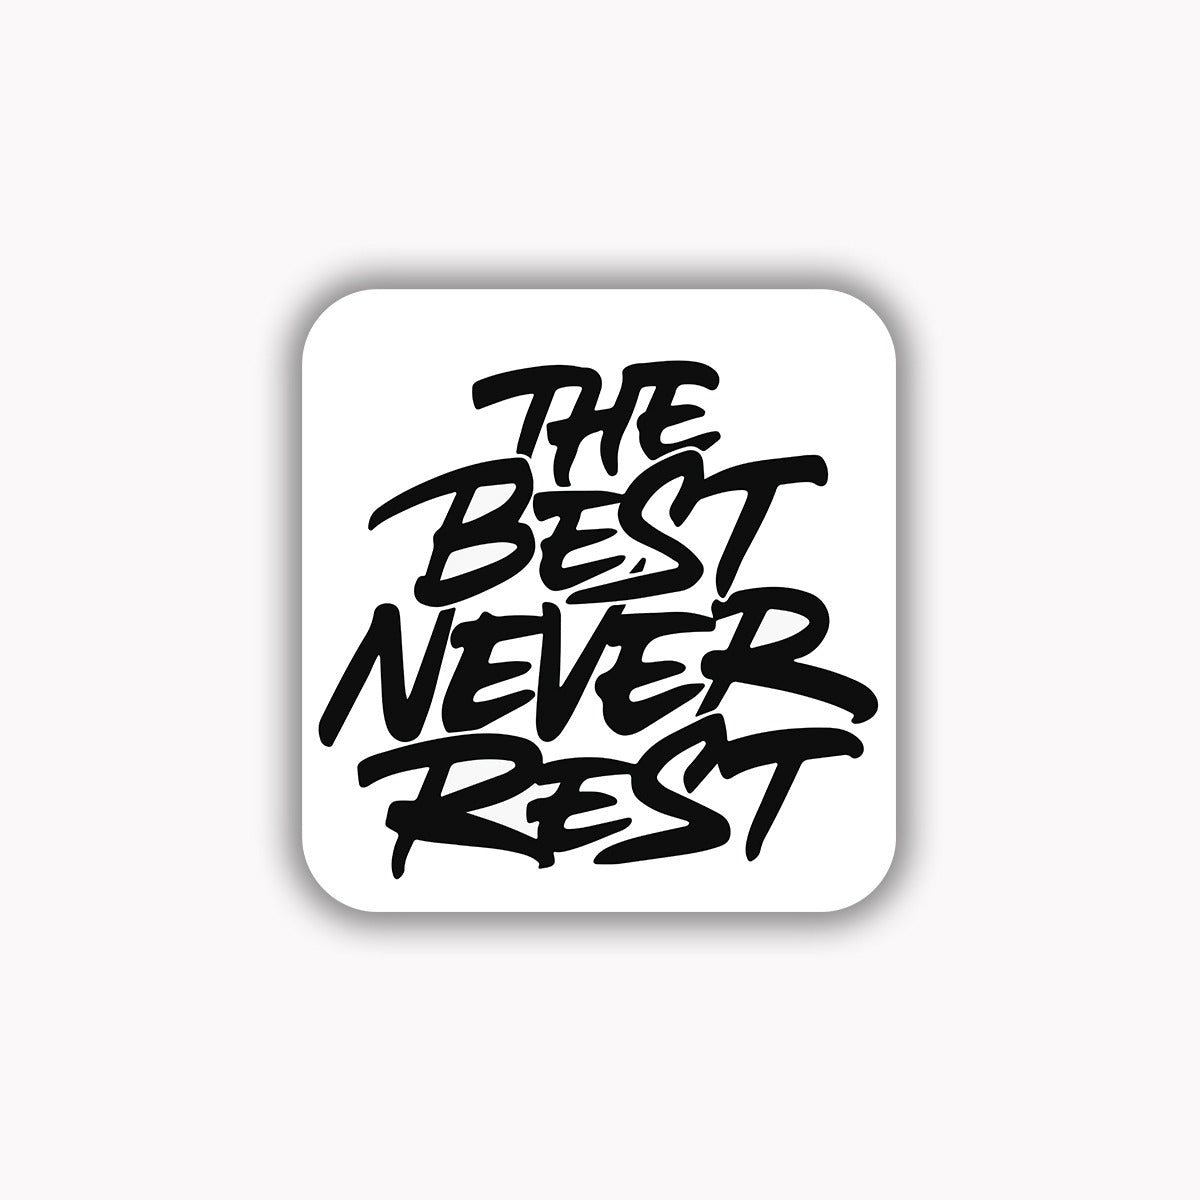 The best never rest